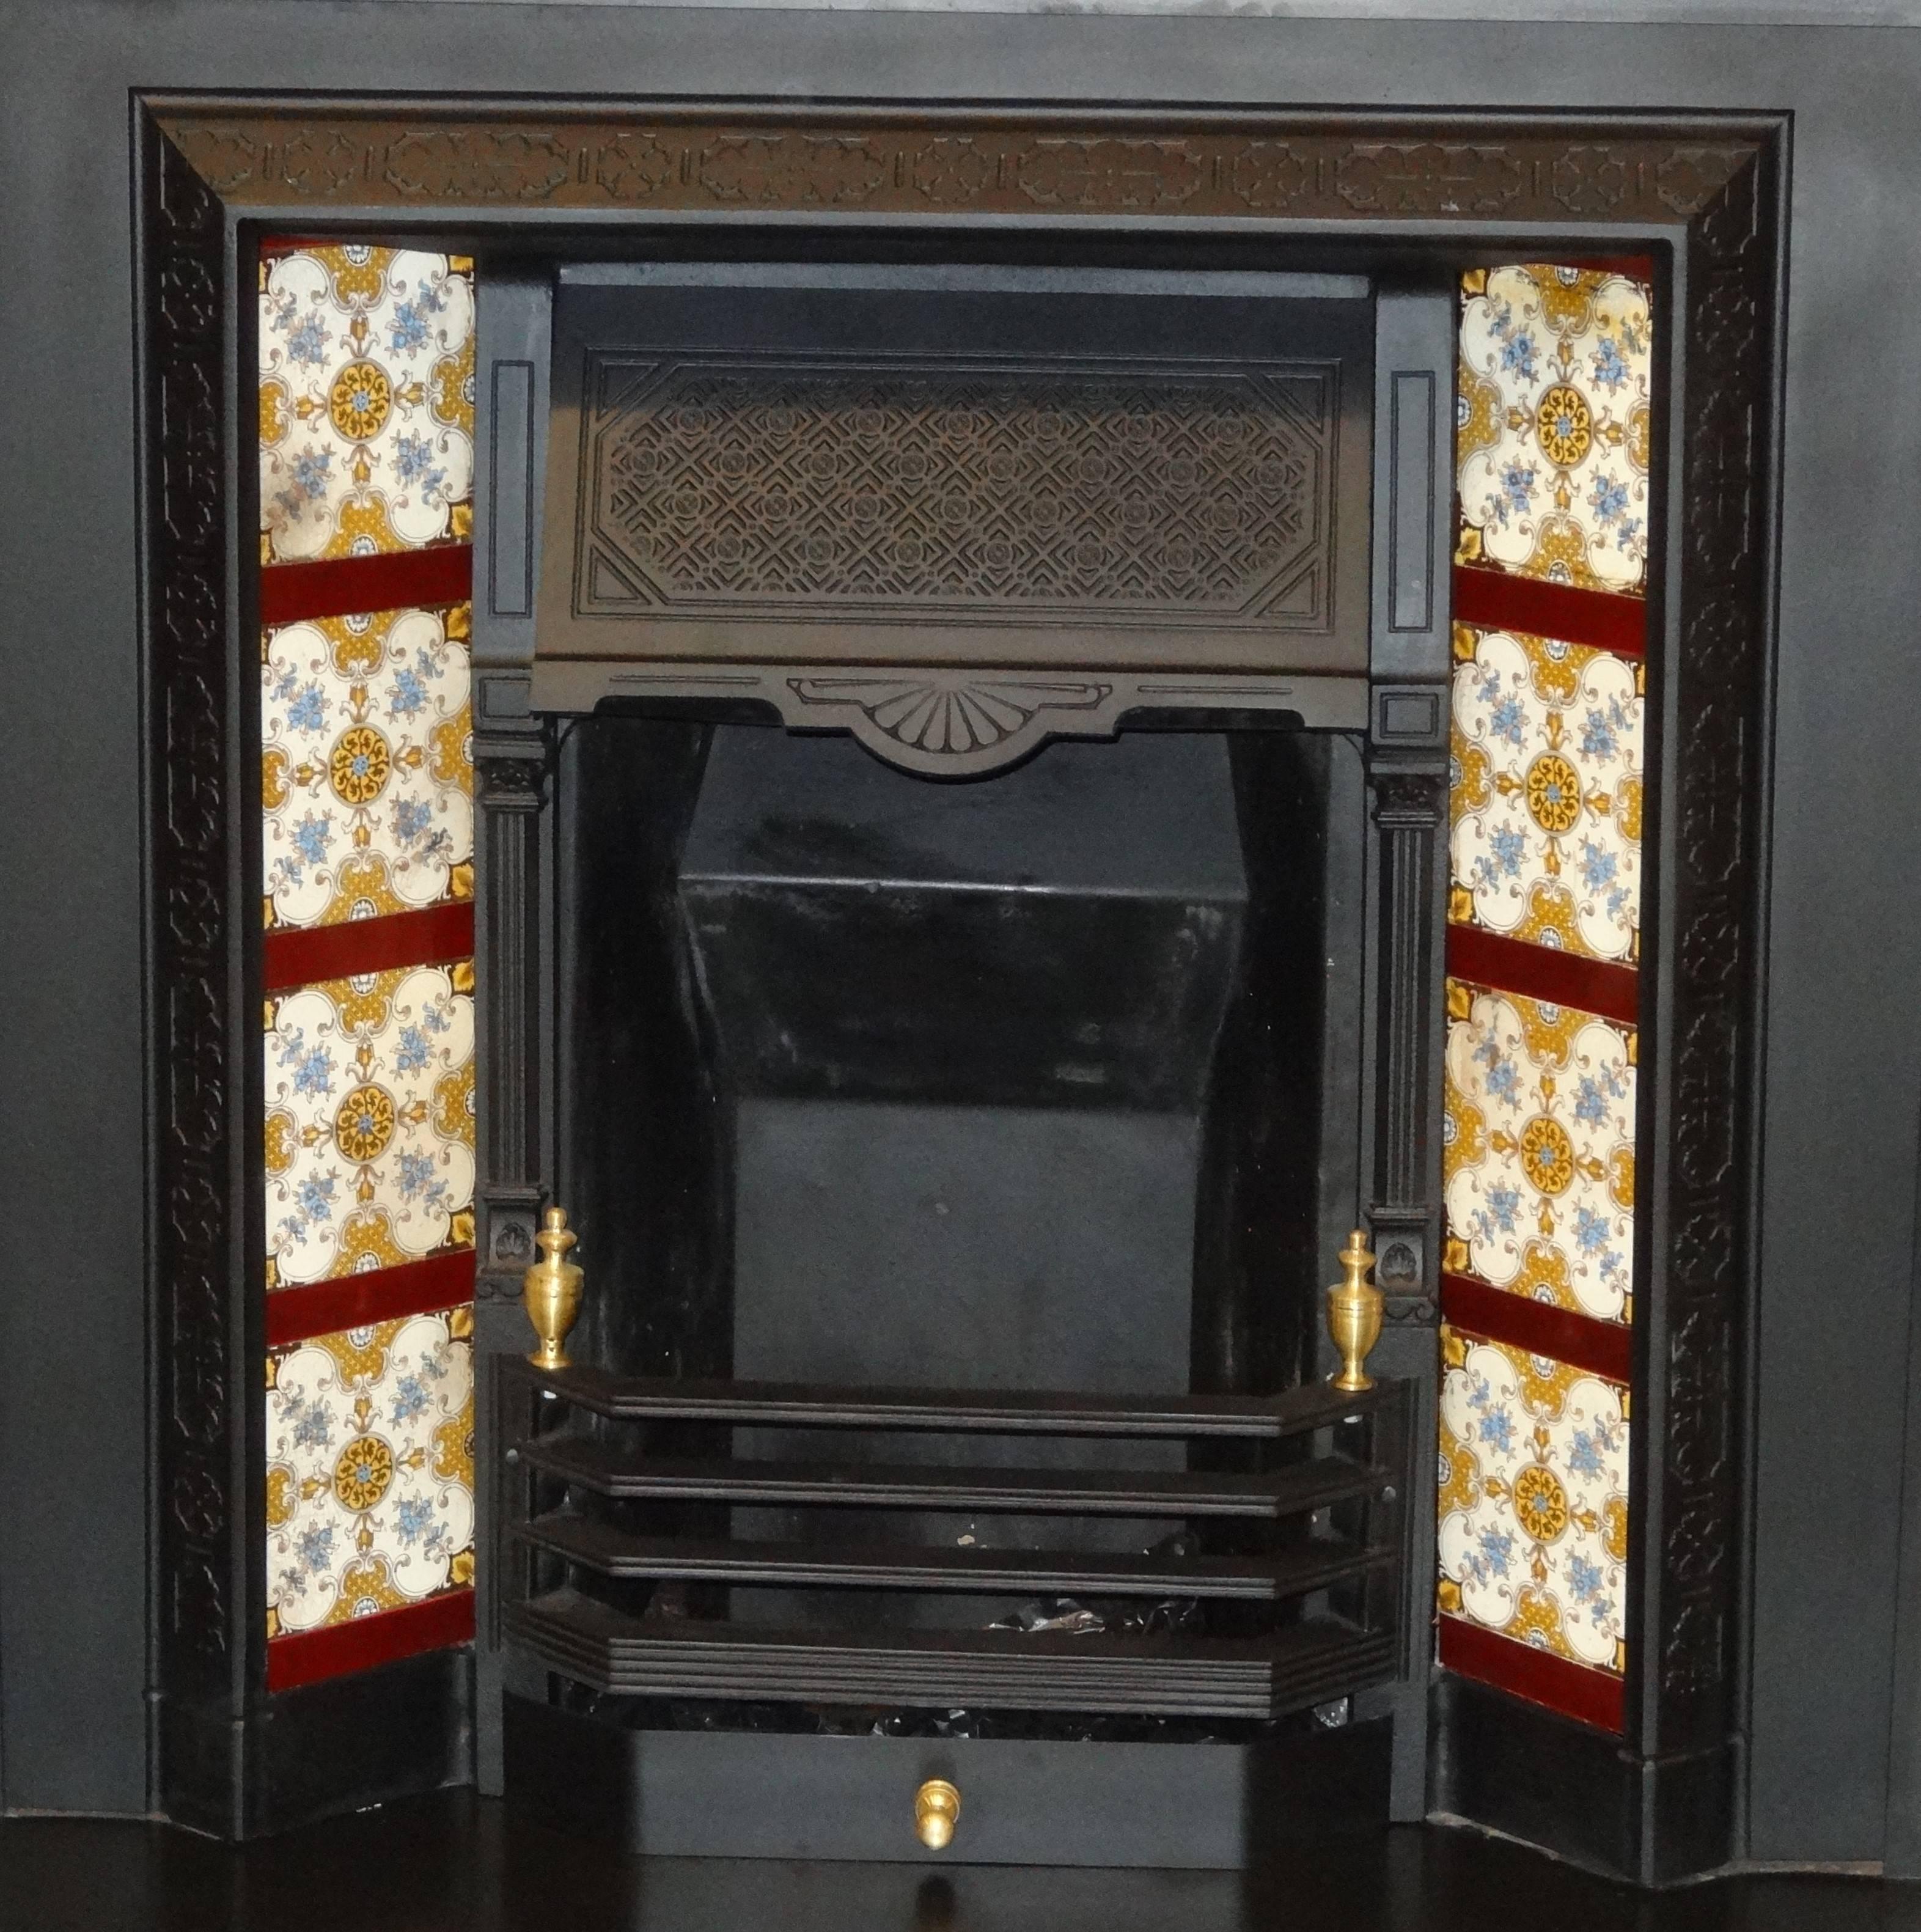 Reclaimed Irish 19th century Victorian cast iron fireplace insert grate with antique tiles.